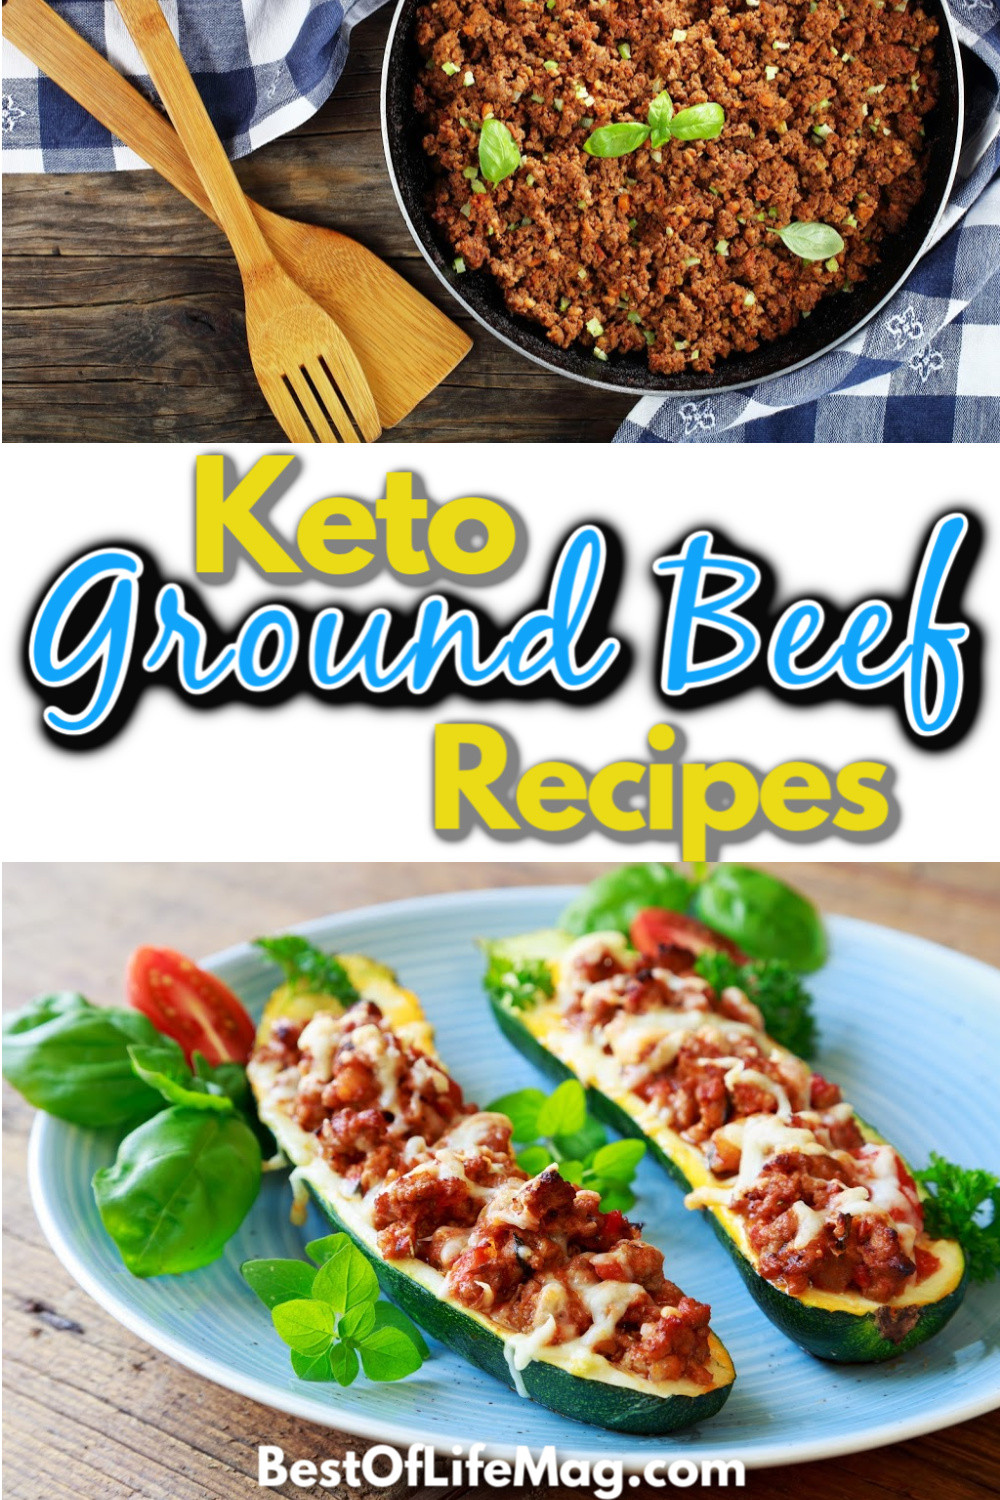 Ground Beef Recipes Healthy Keto
 Easy Keto Recipes with Ground Beef The Best of Life Magazine